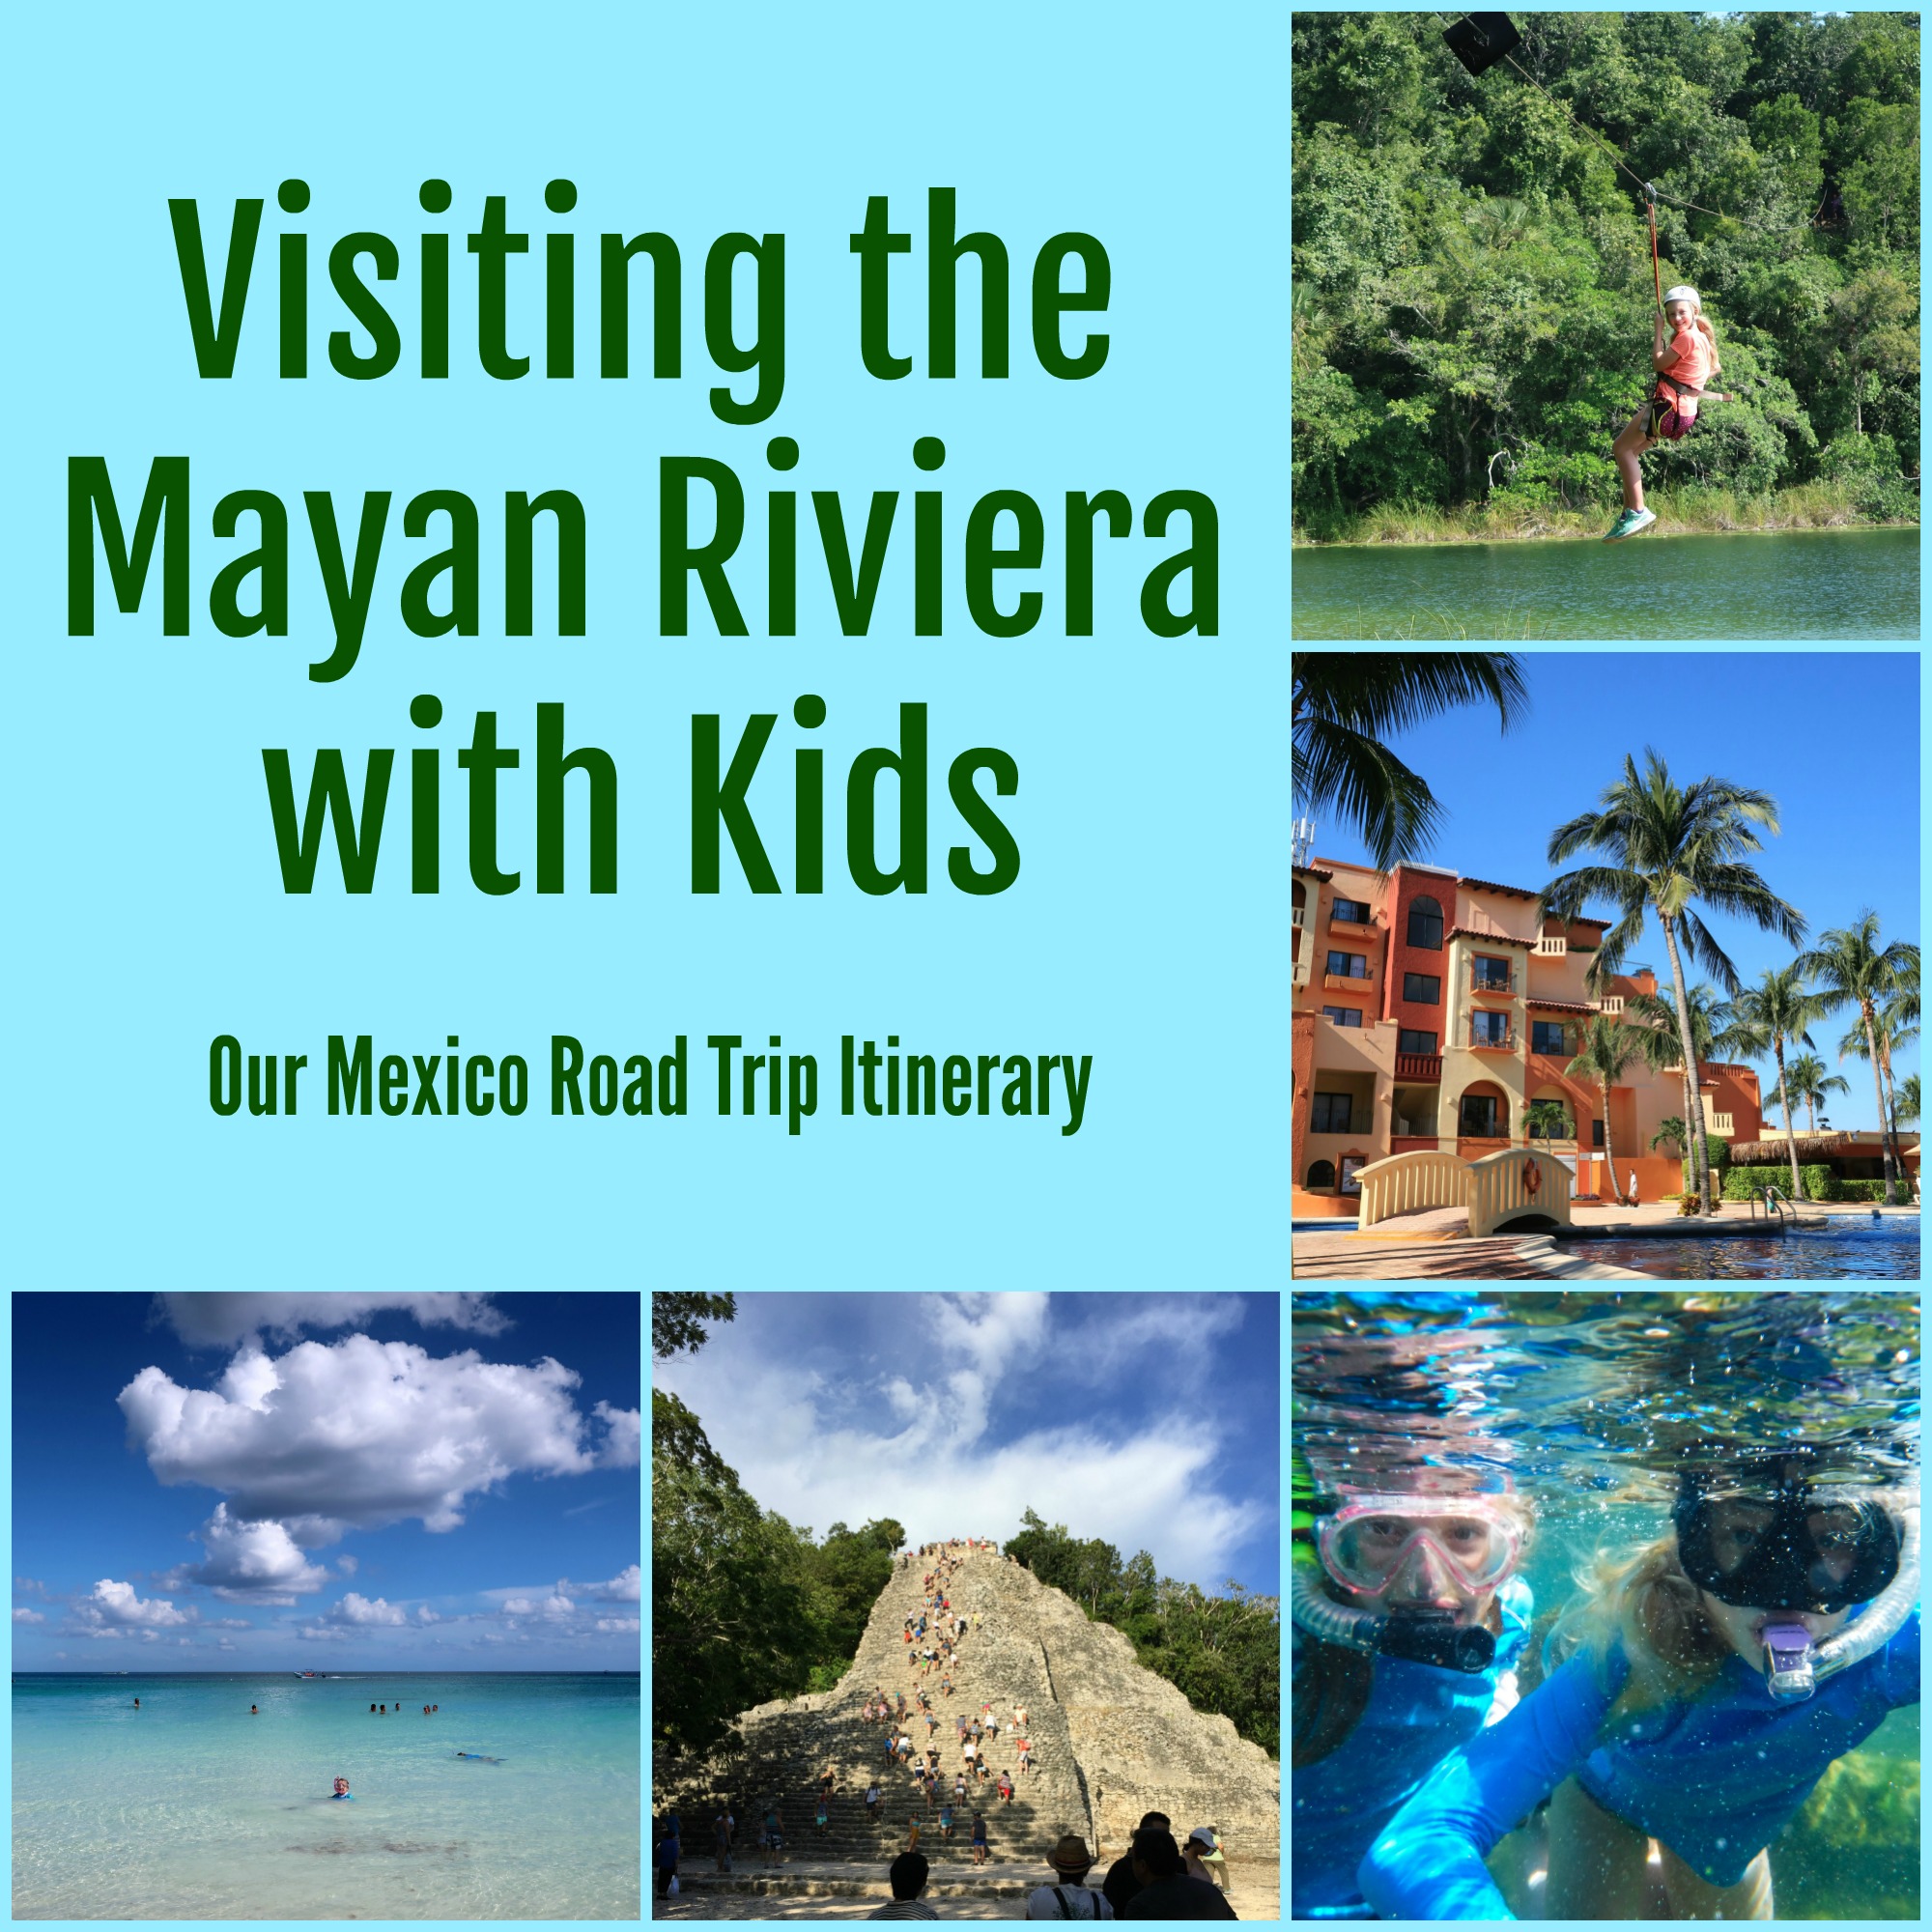 Visiting the Mayan Riviera with Kids